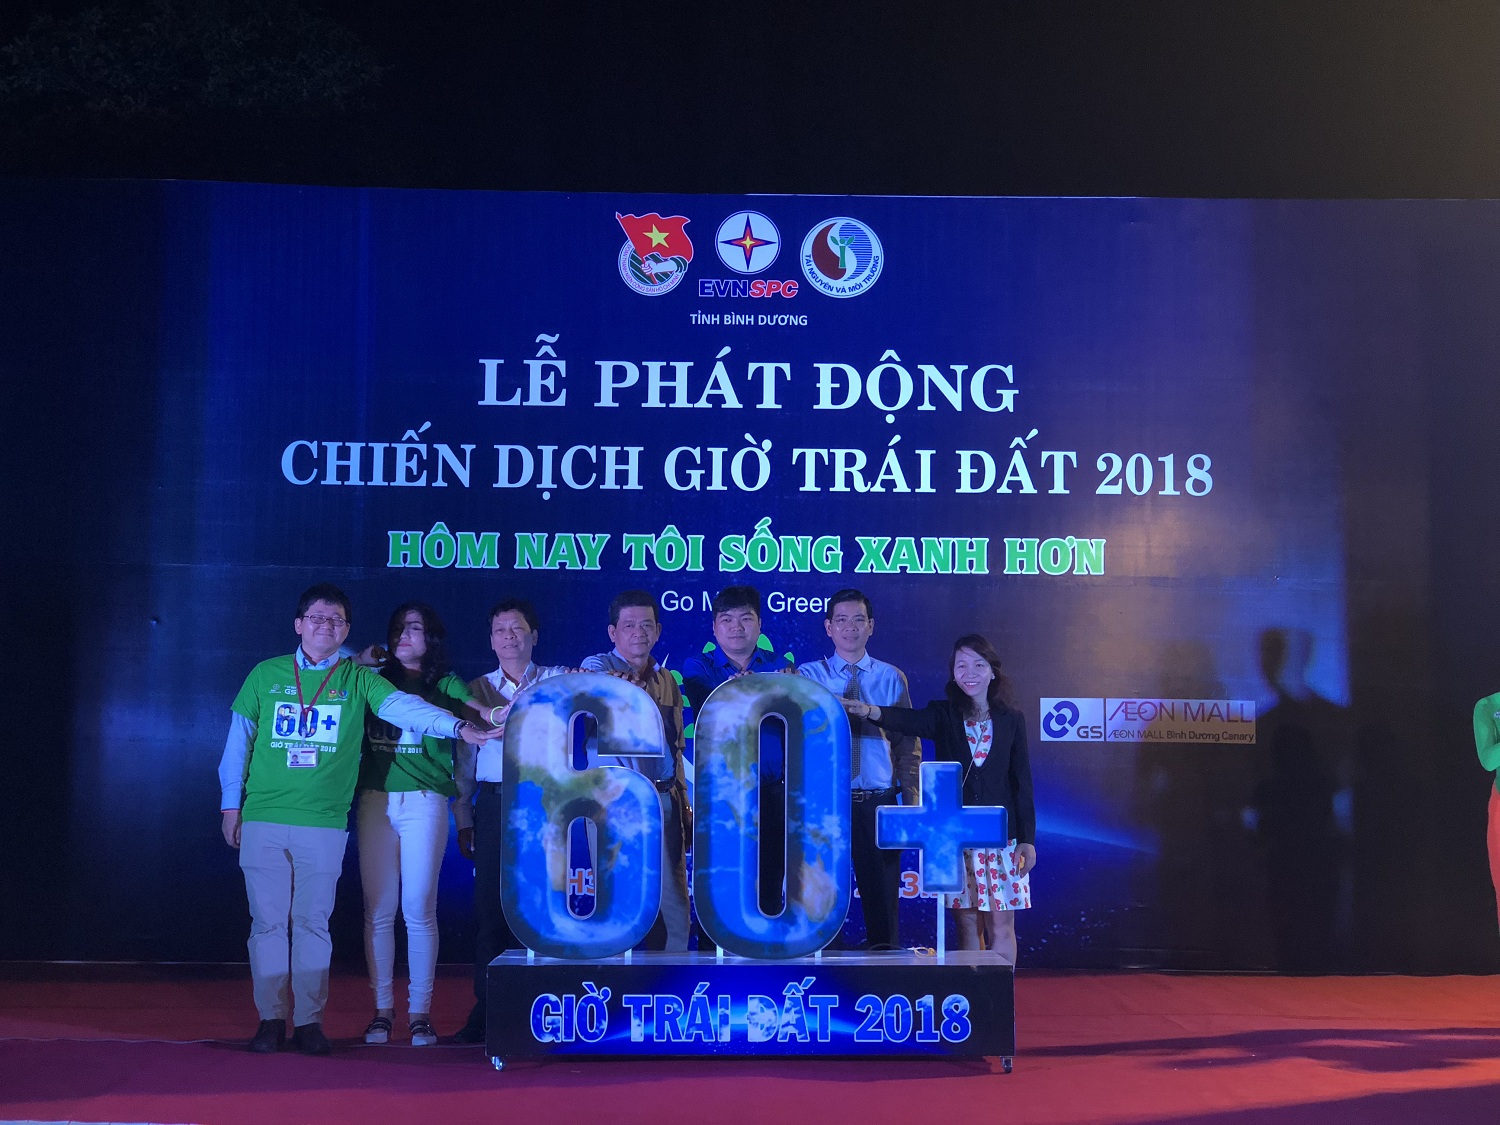 GSV SPONSORED THE EARTH HOUR 2018 IN BINH DUONG